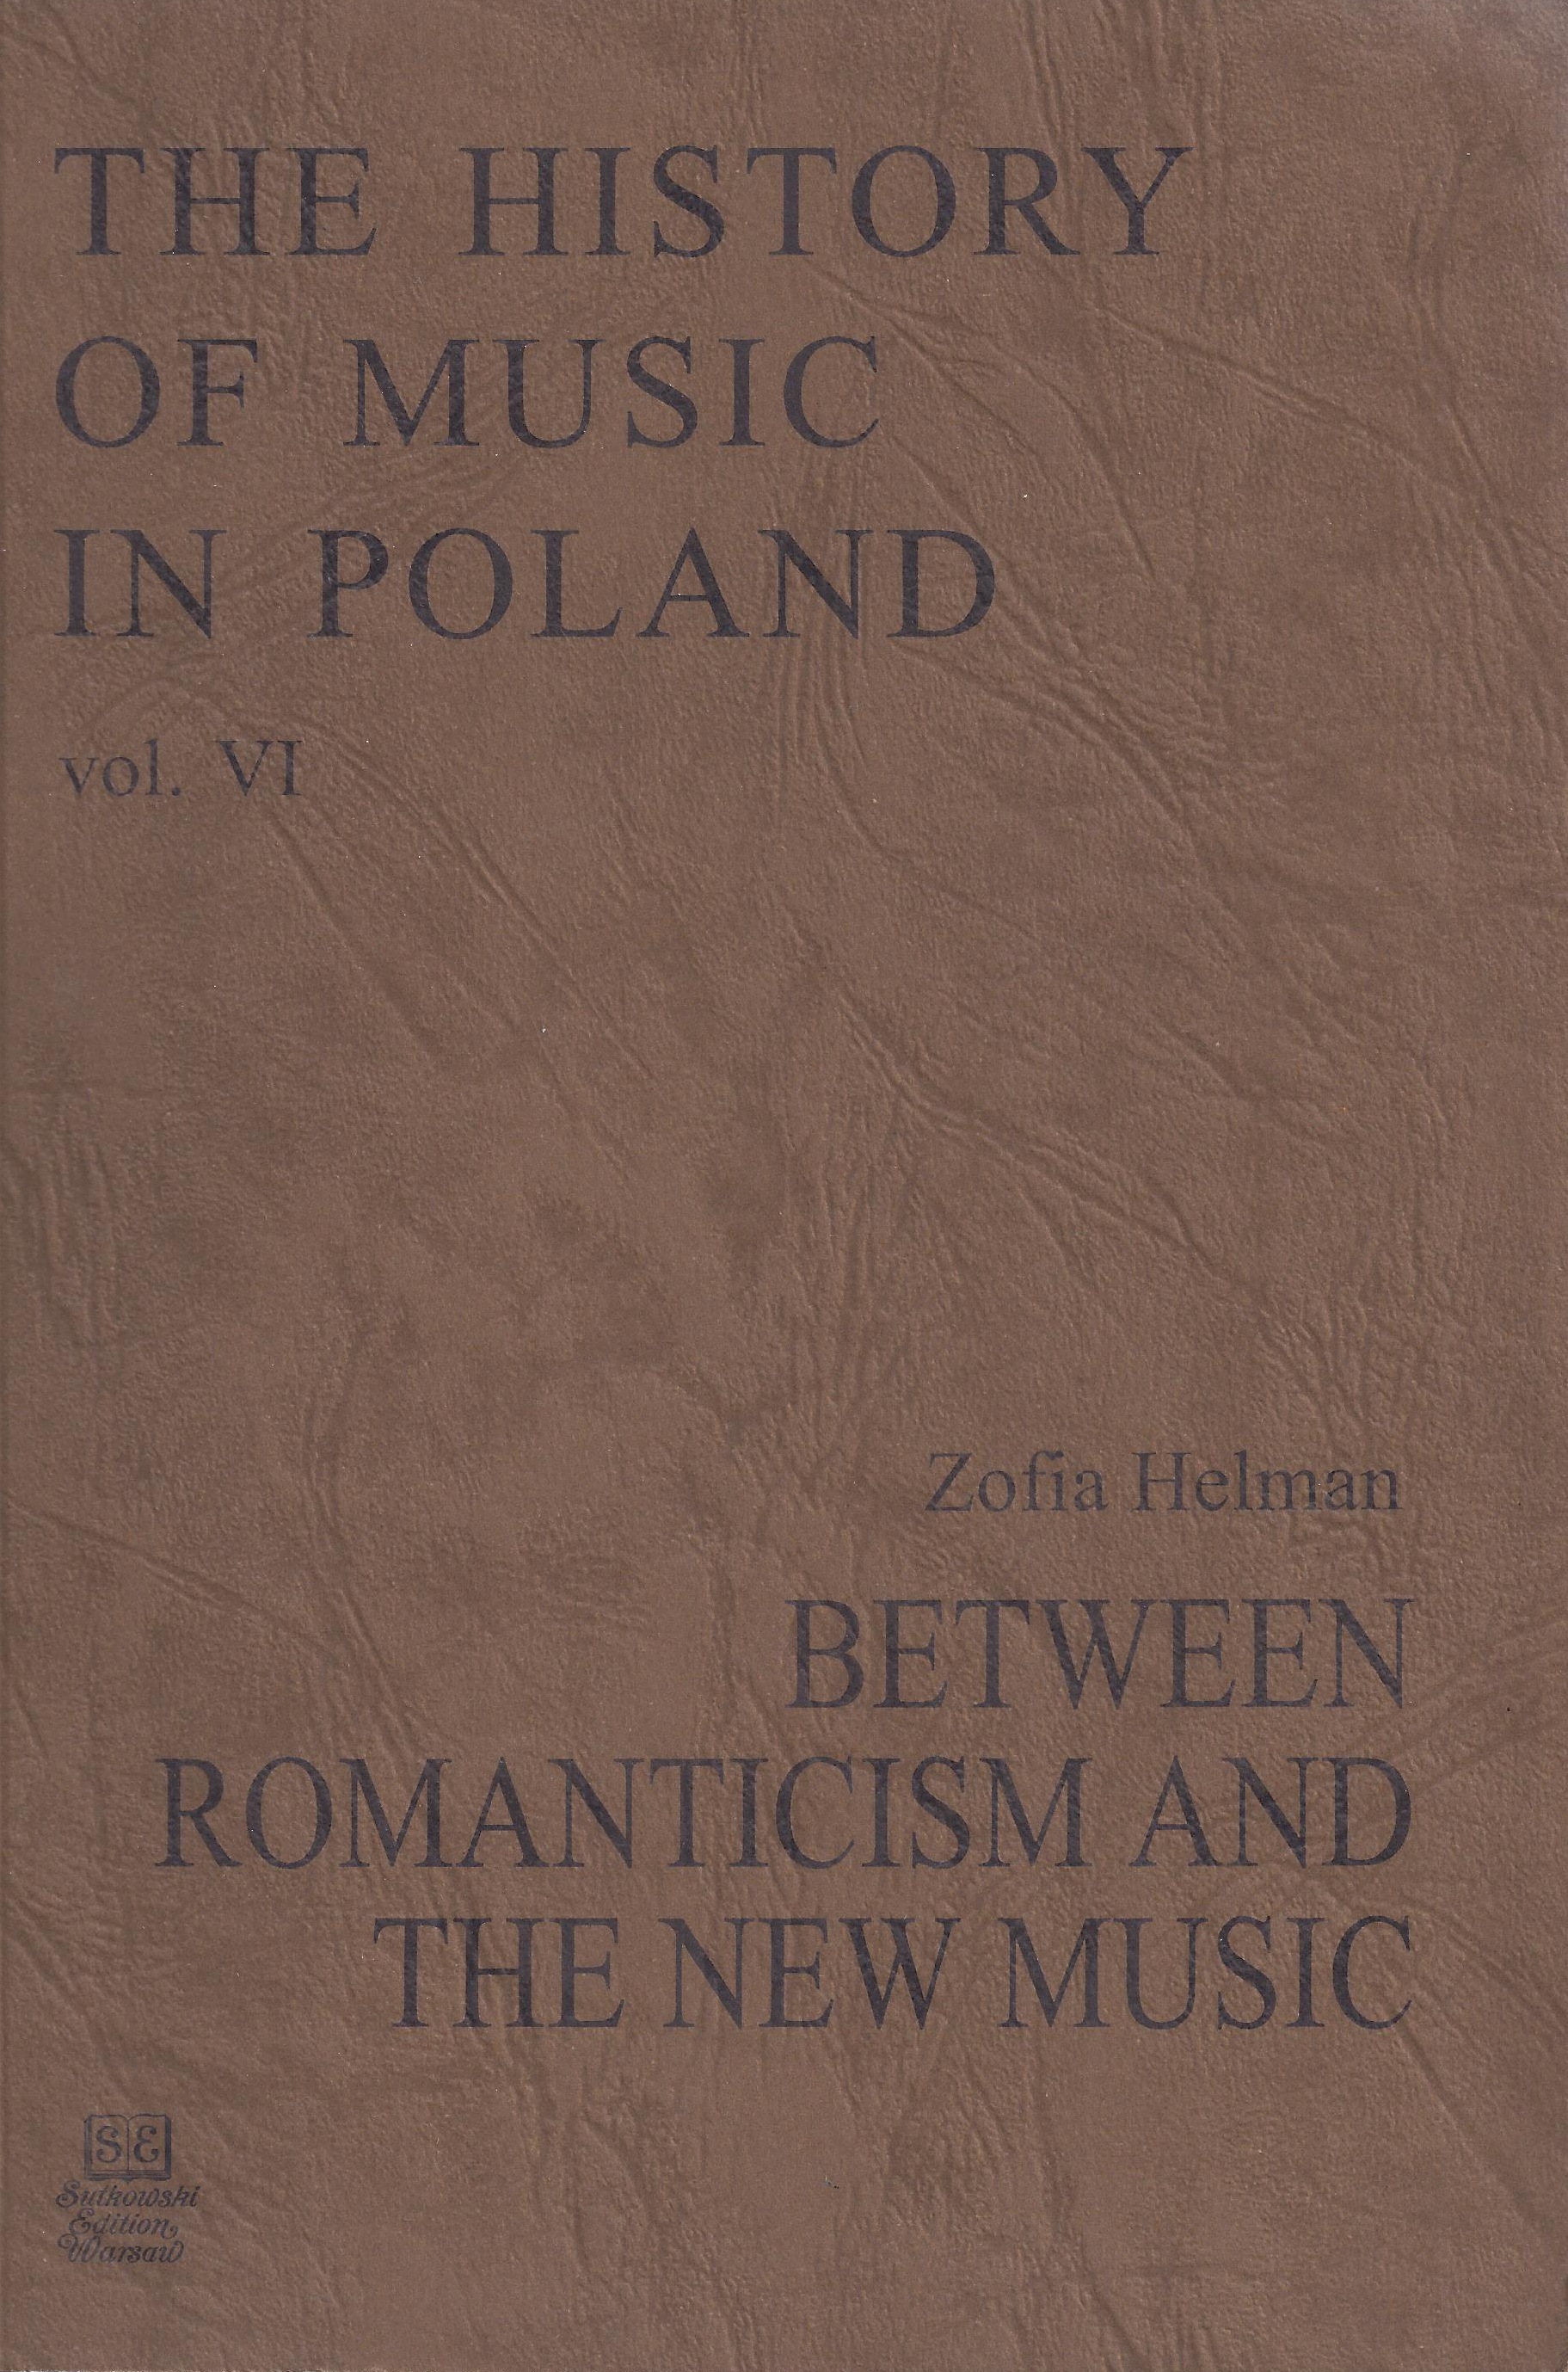 The History of Music in Poland vol VI – Betwen Romanticism and The New Music